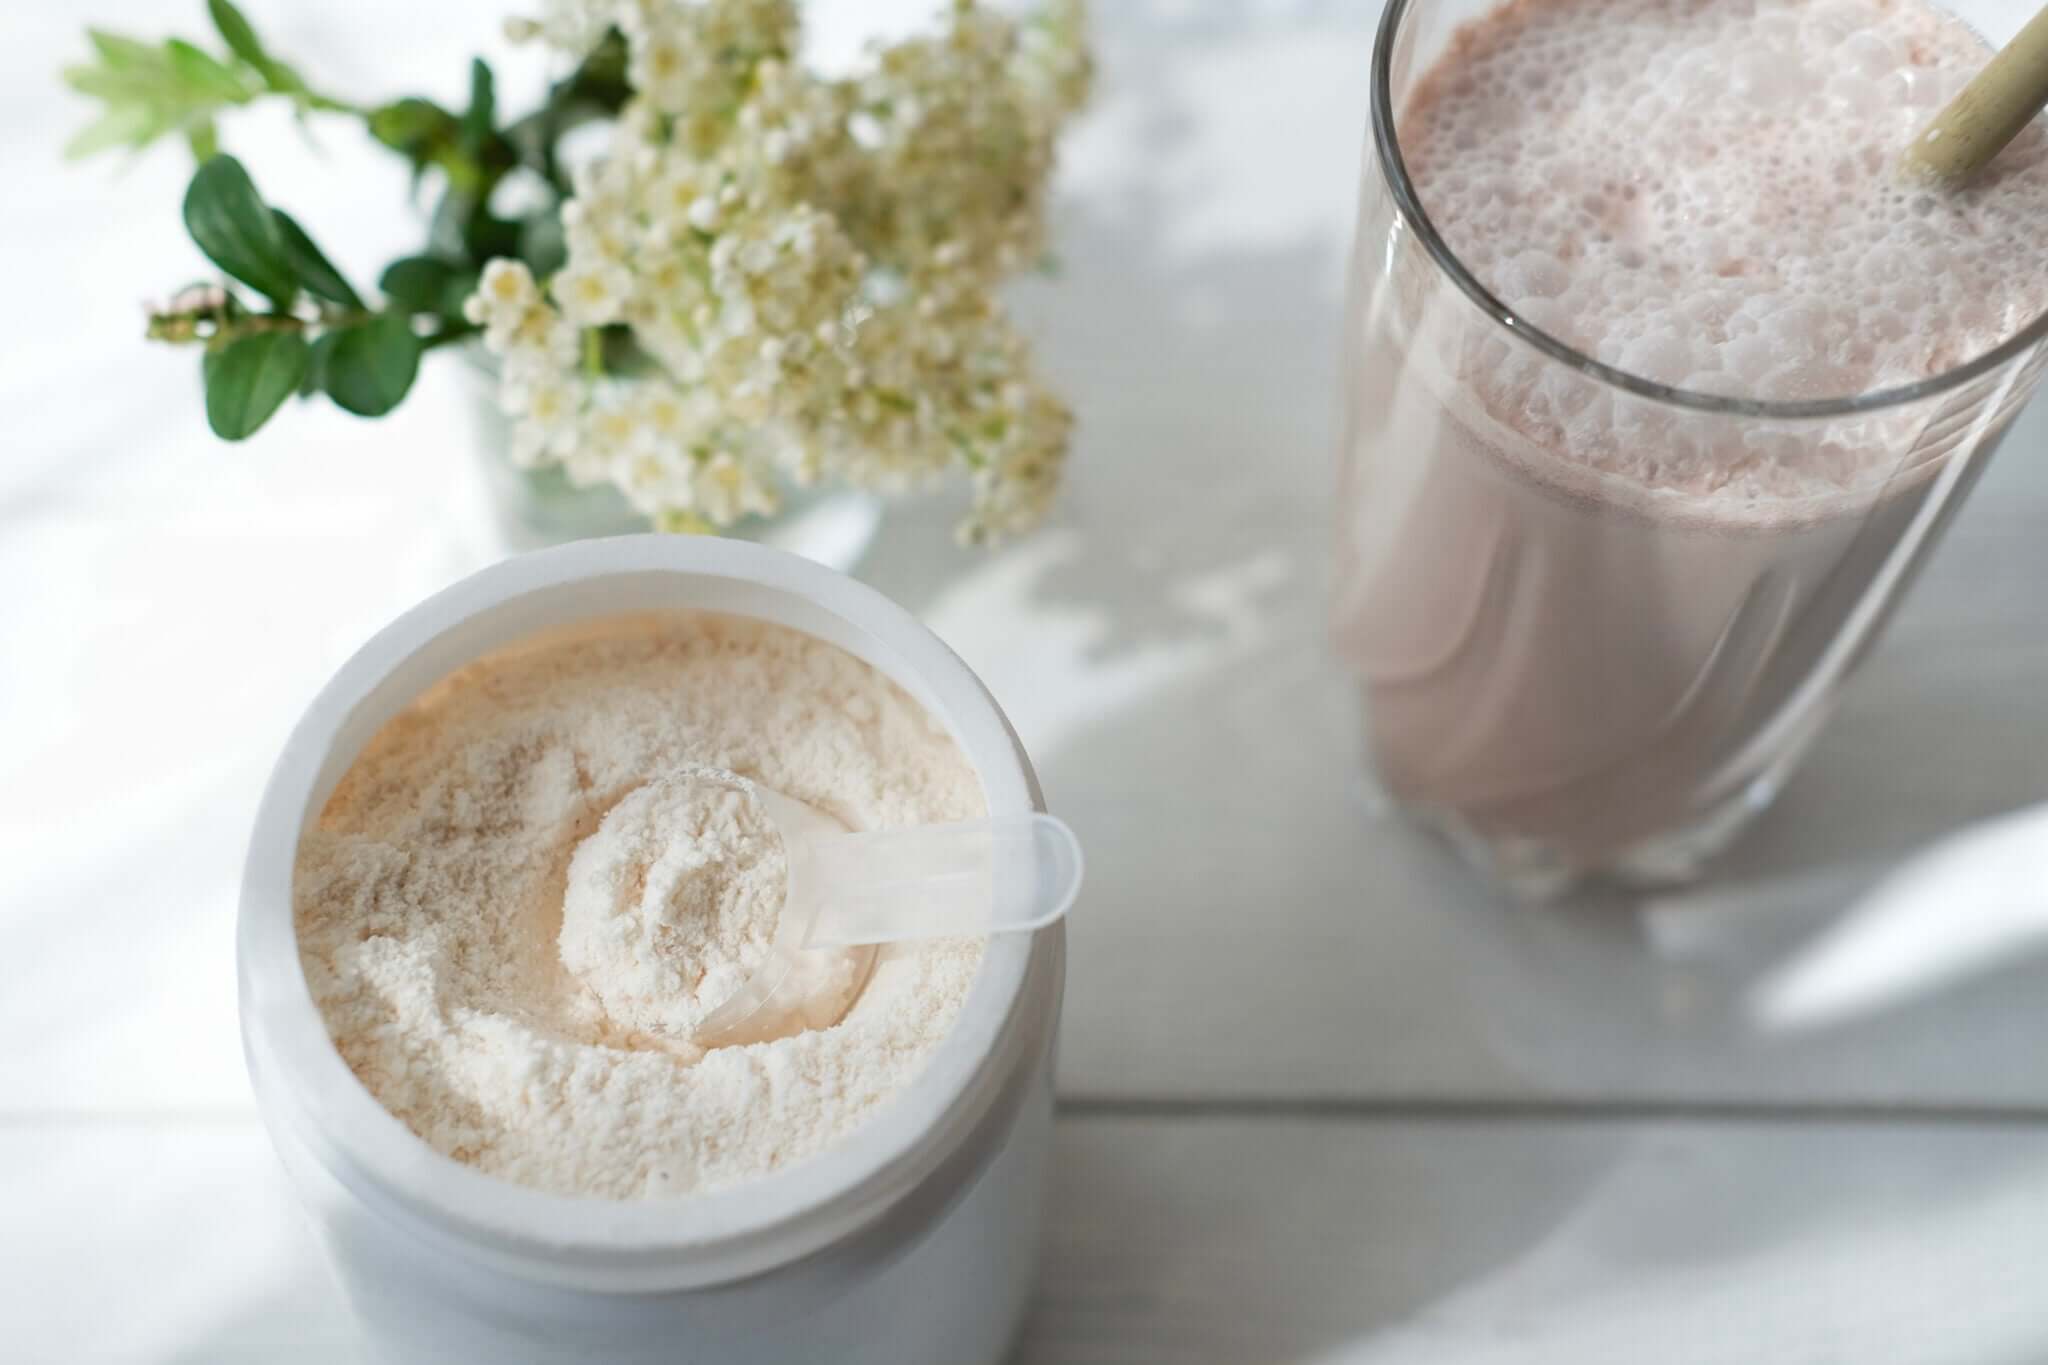 DAIRY FREE: WHY CHOOSE PLANT-BASED PROTEIN POWDER?